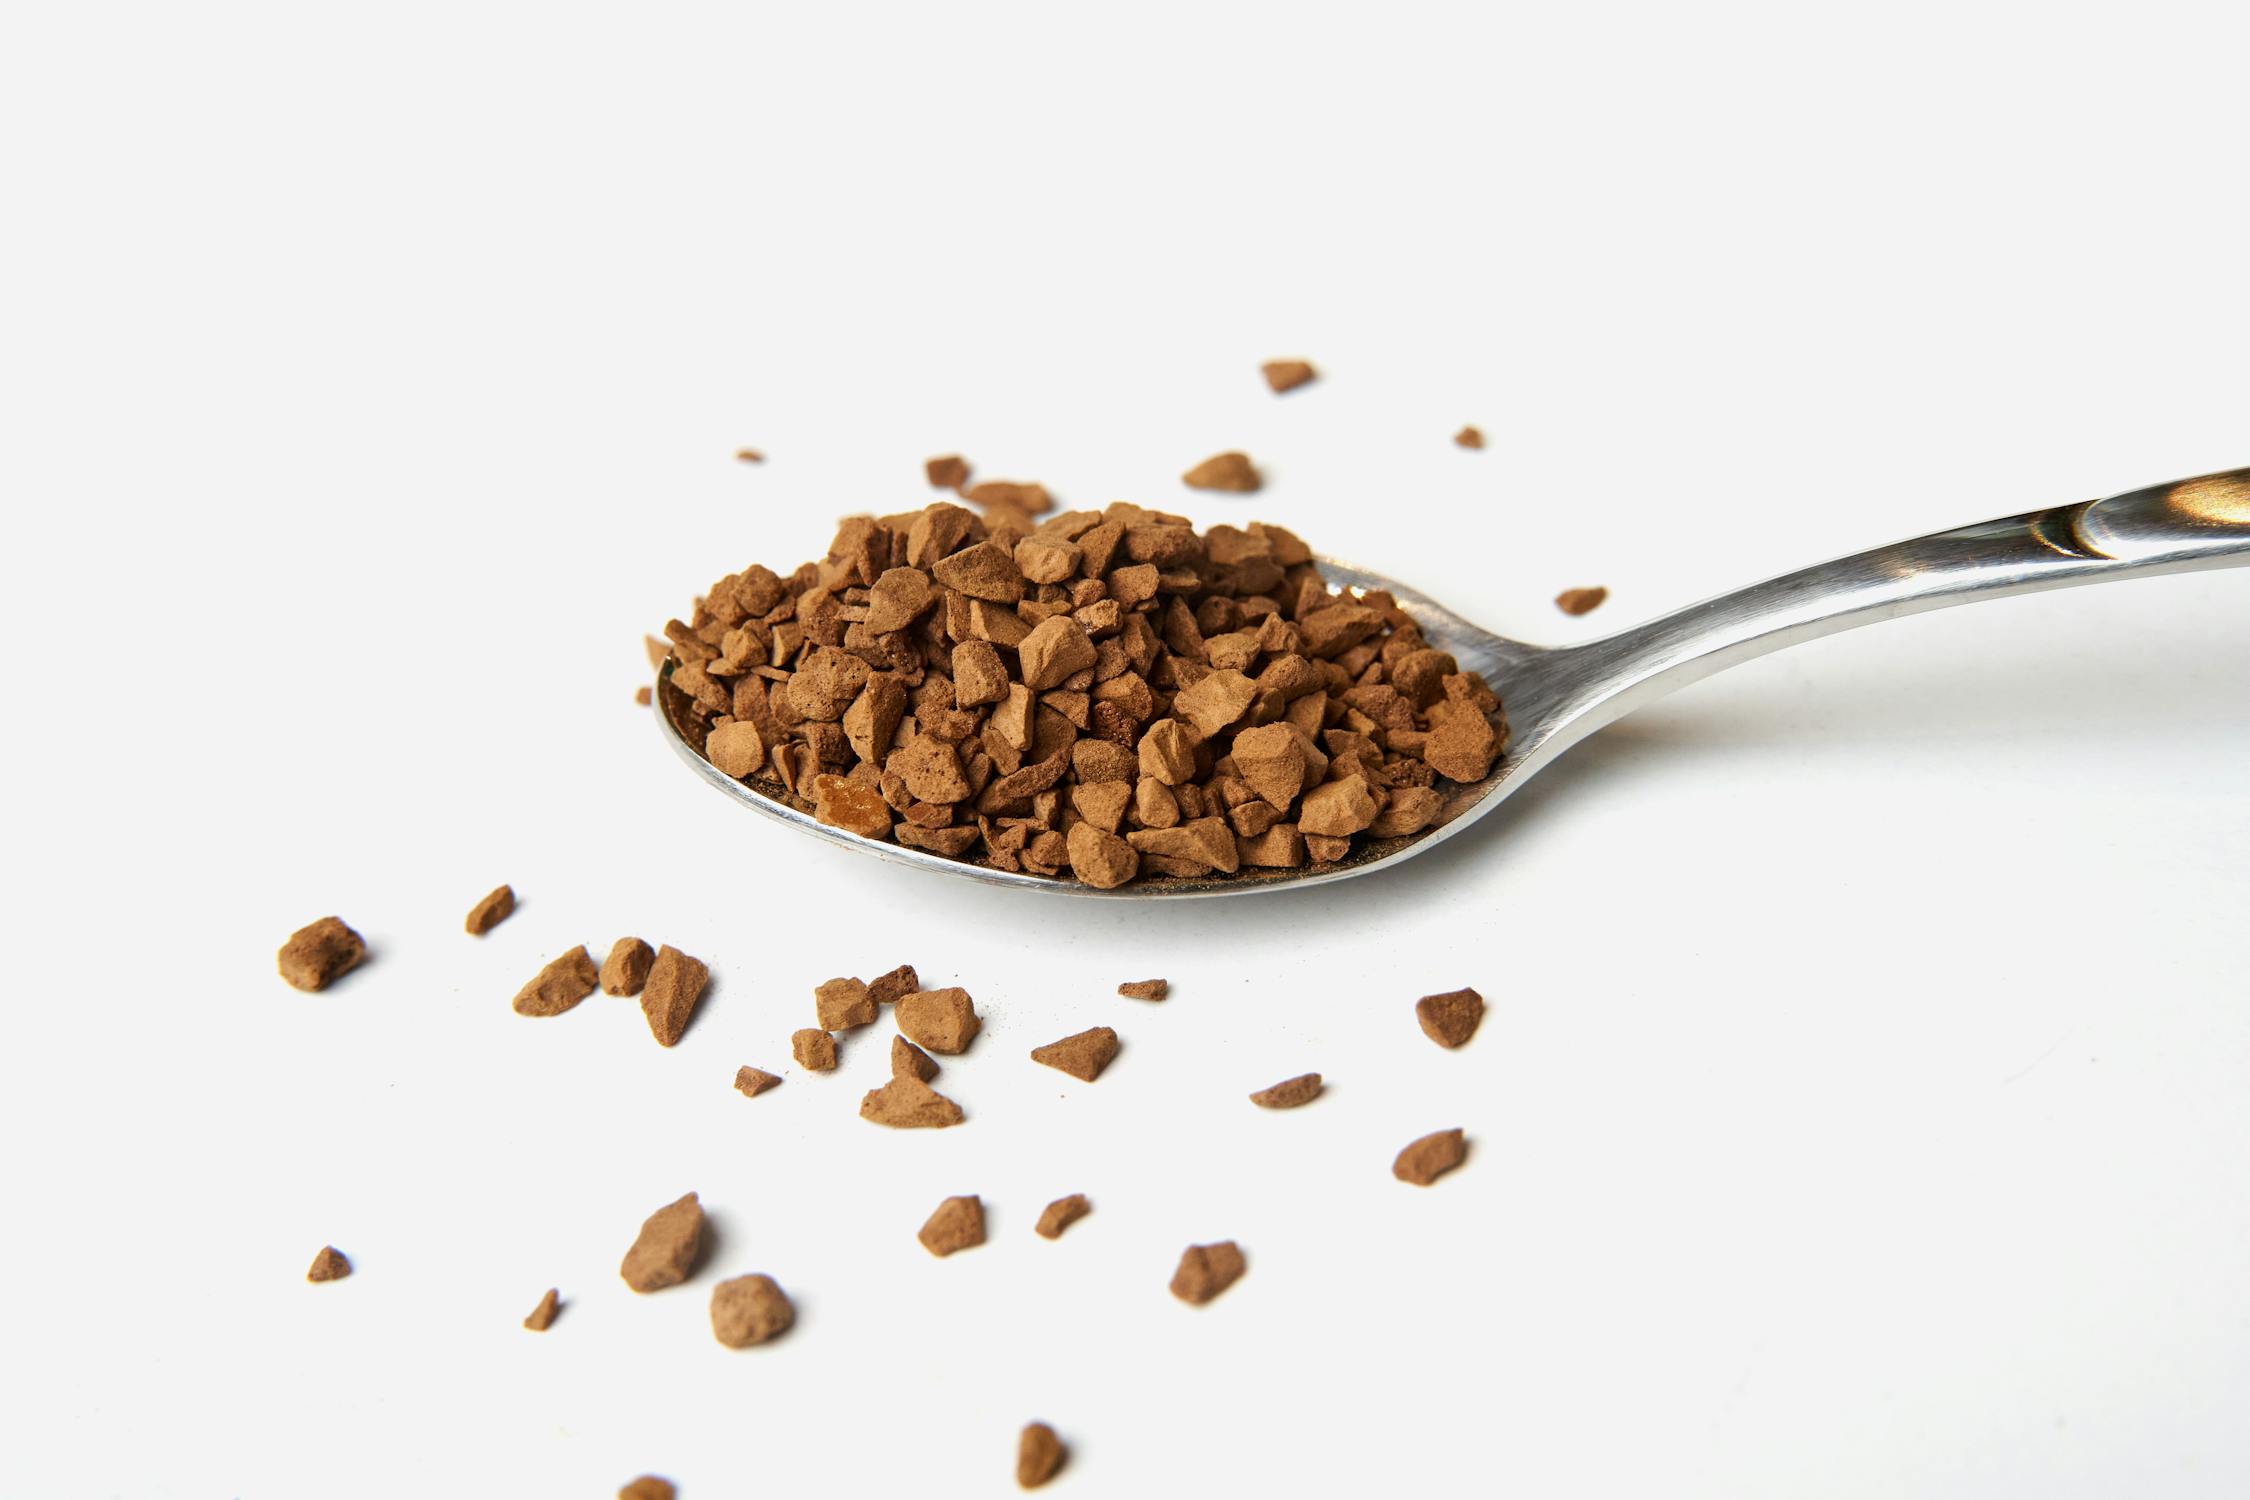 Brown instant Coffee Powder on Silver Spoon